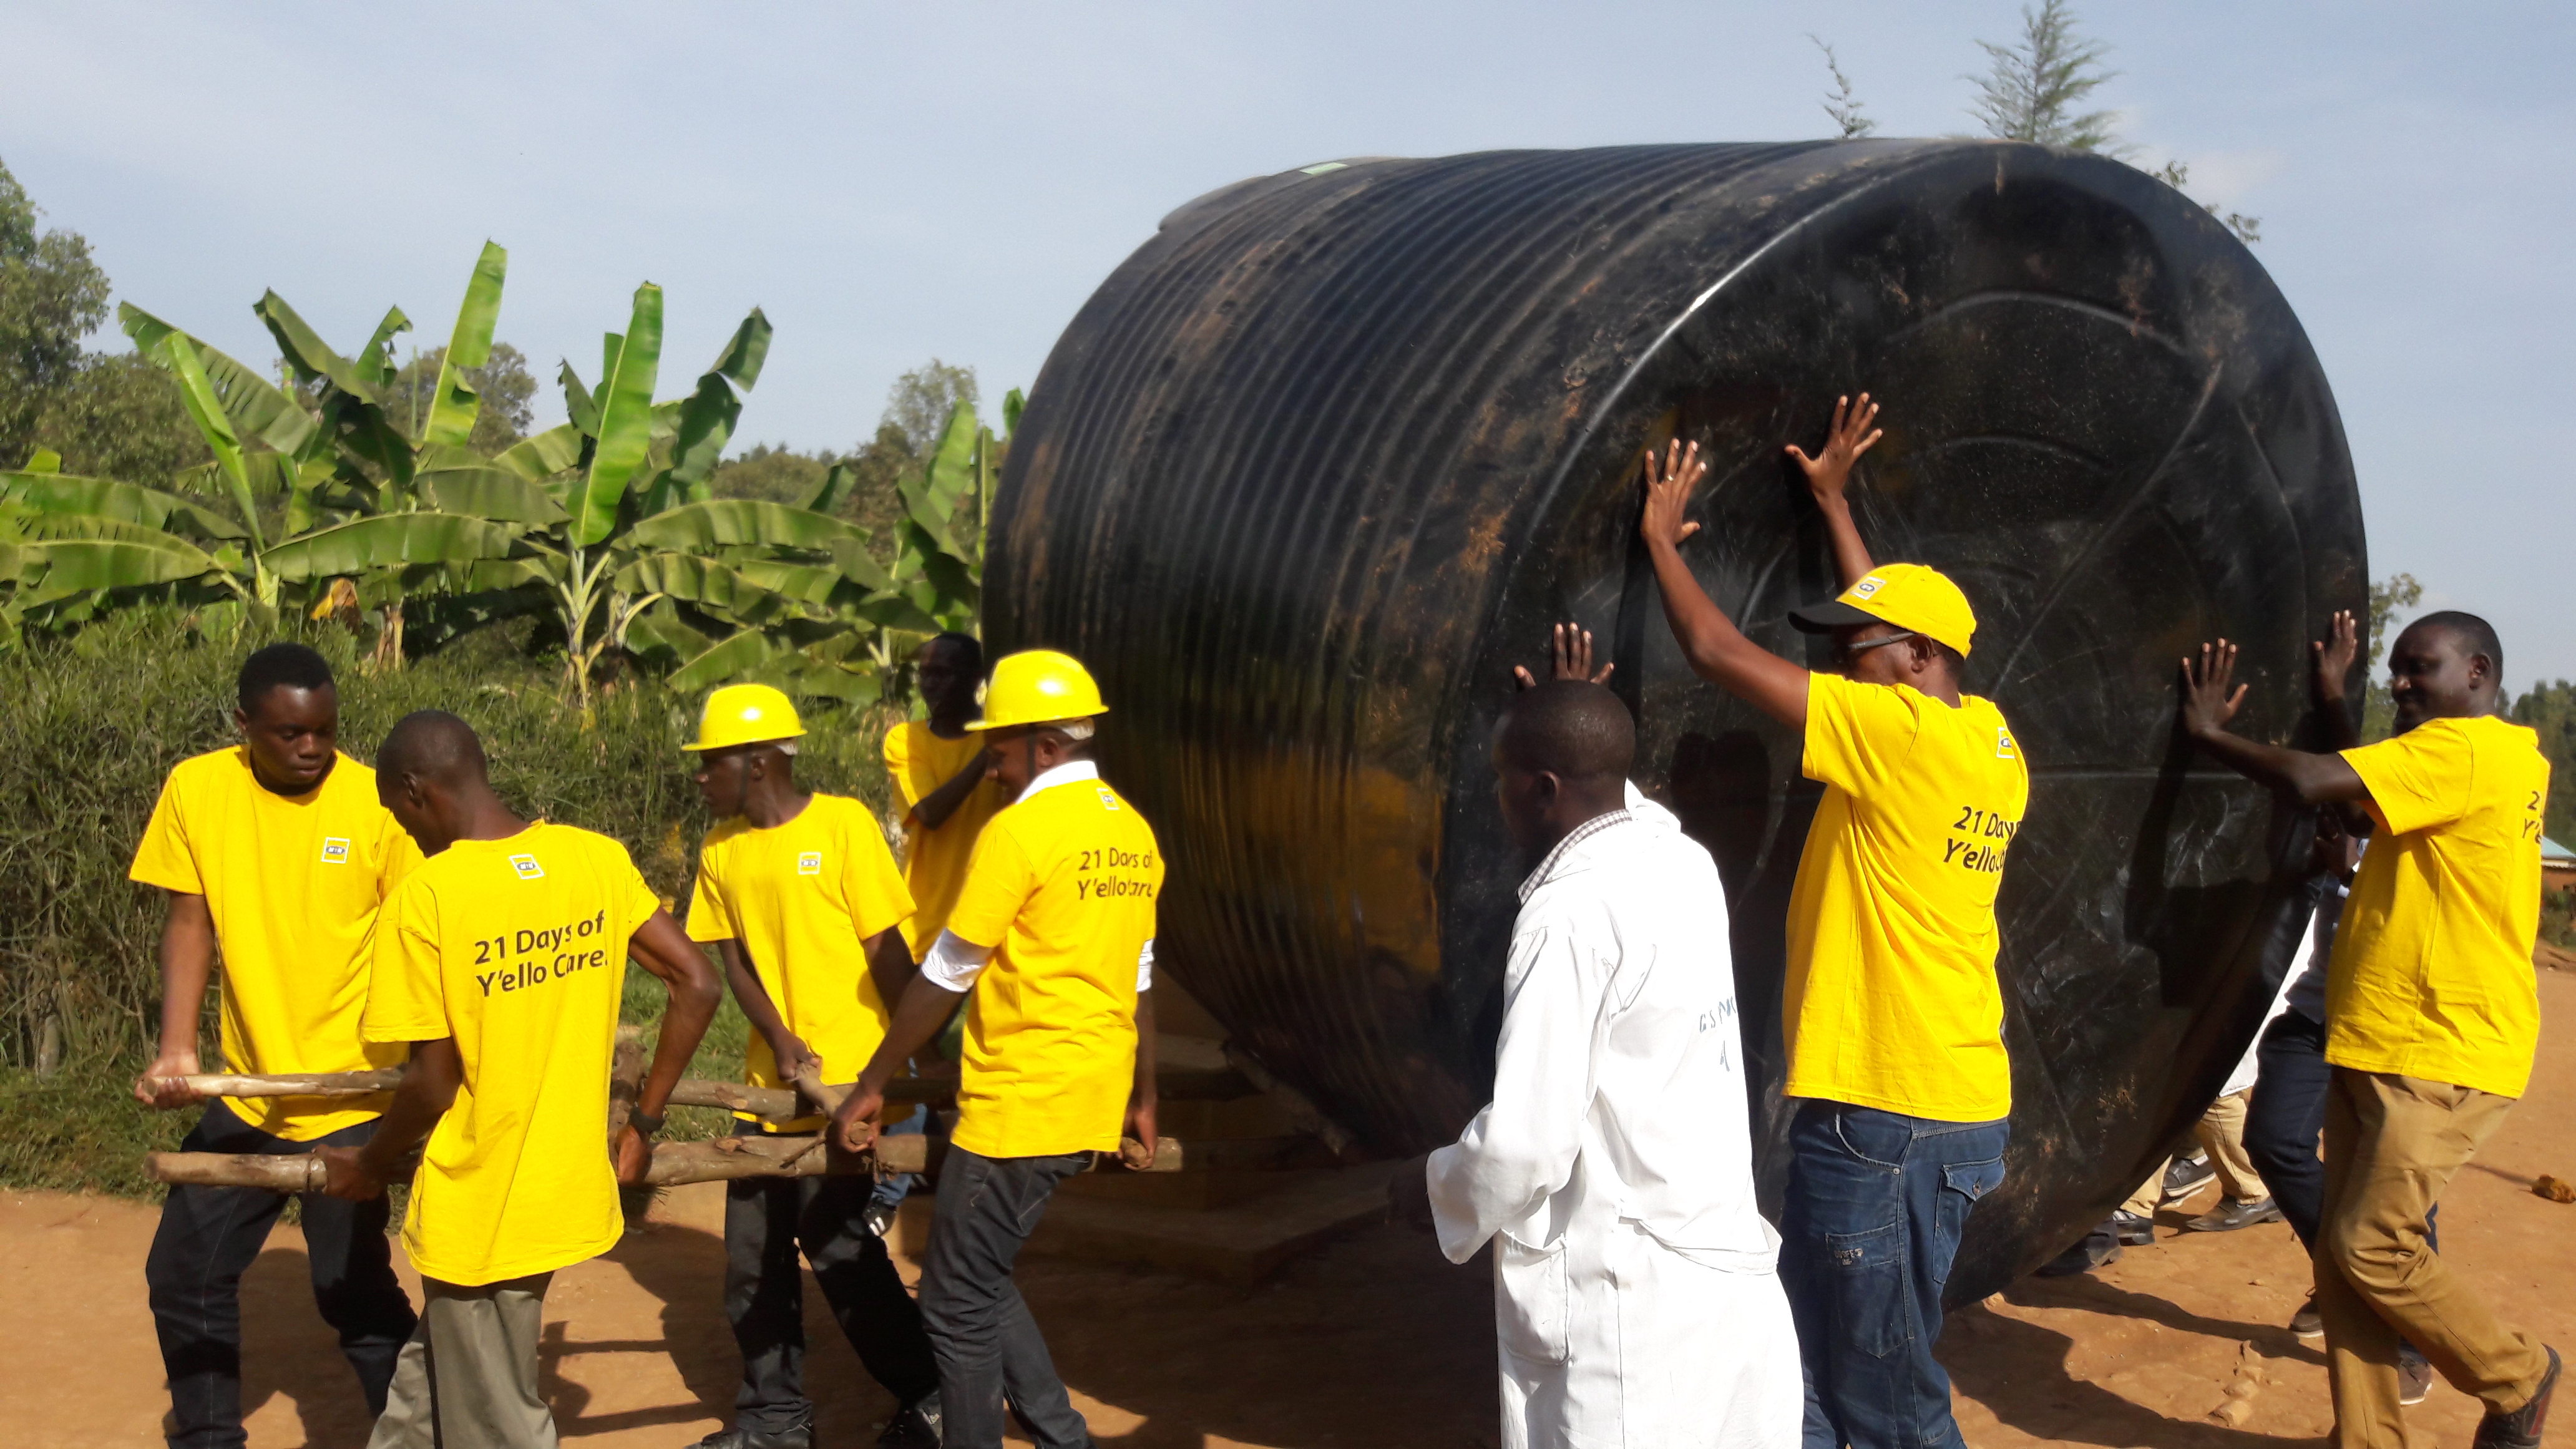 MTN employees empower youth during 21 Days of Y’ello Care